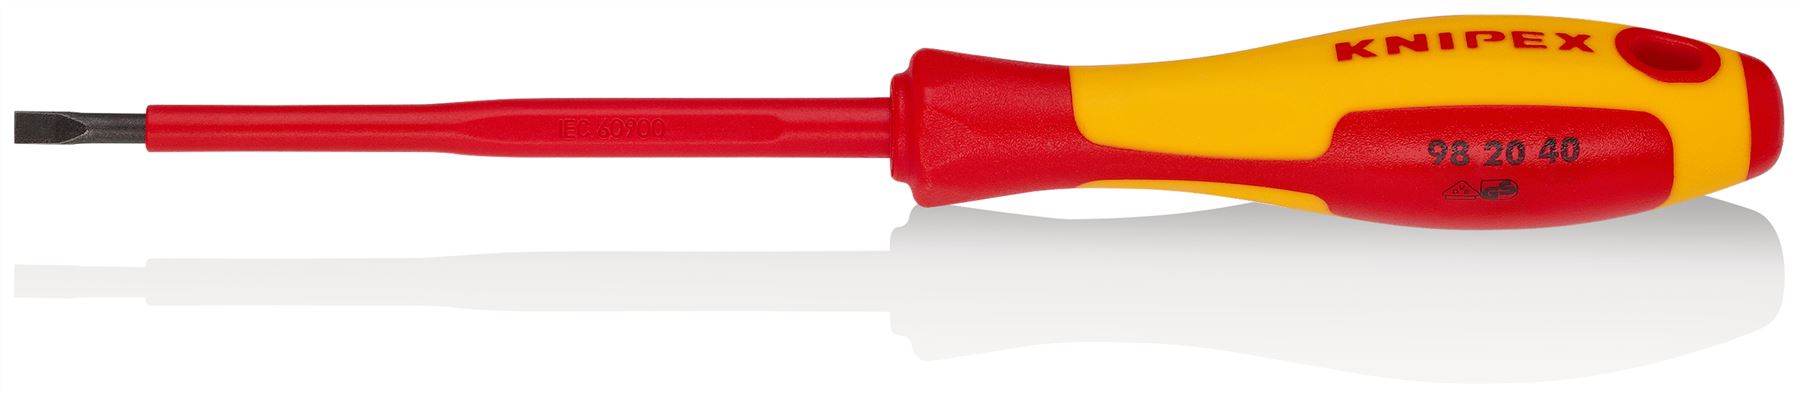 KNIPEX Screwdriver for Slotted Screws 4.0 x 0.8mm VDE Insulated Multi Component Grips 202mm 98 20 40